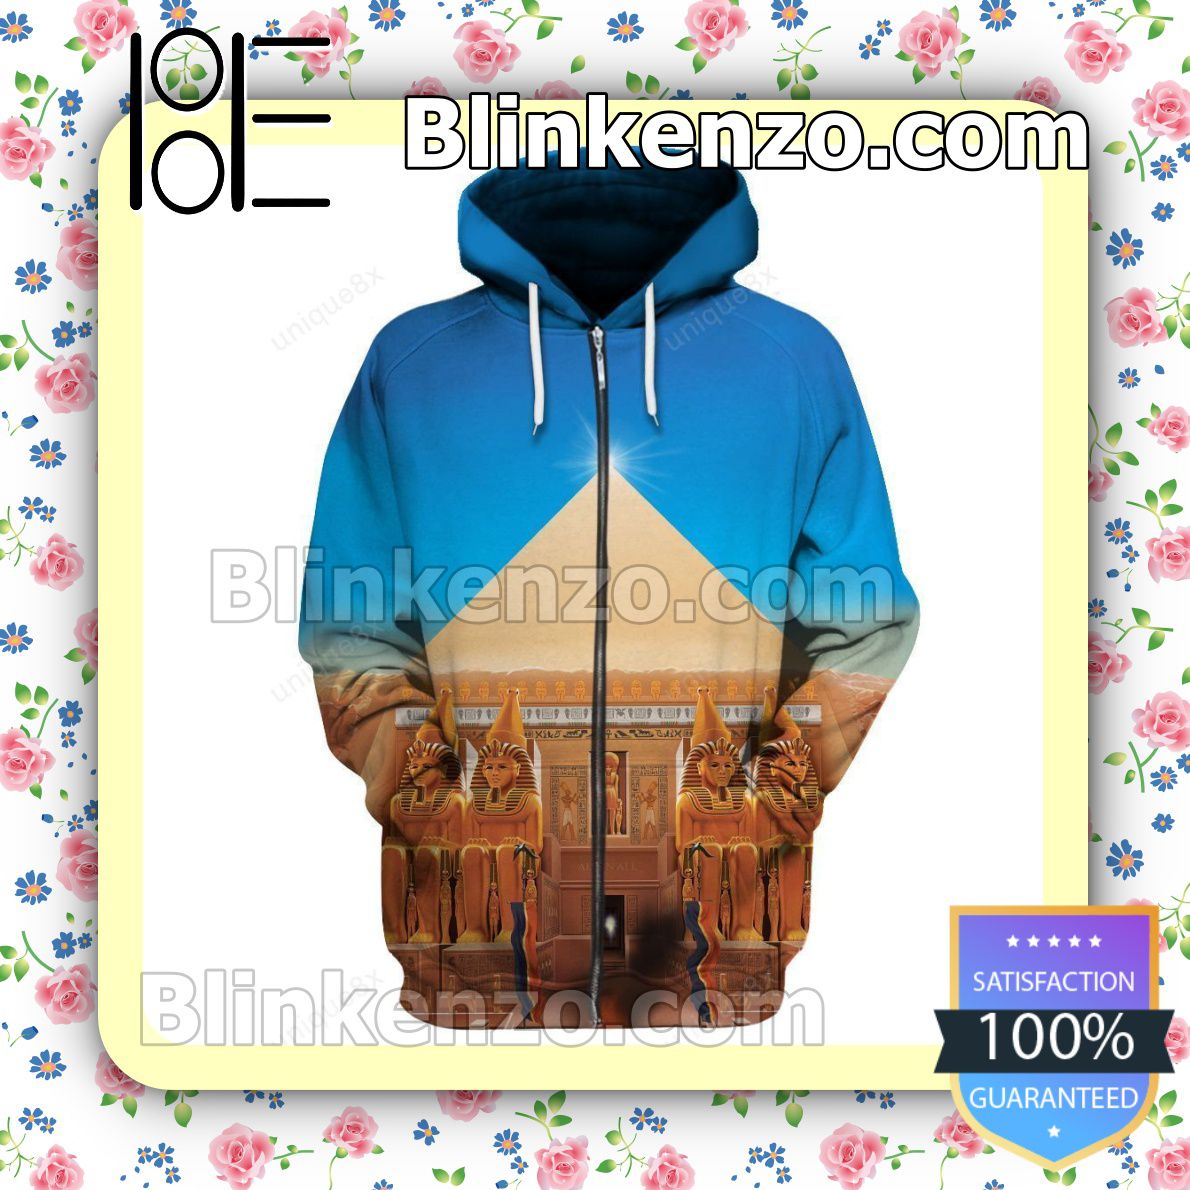 Earth, Wind And Fire Fantasy Album Cover Hooded Sweatshirt